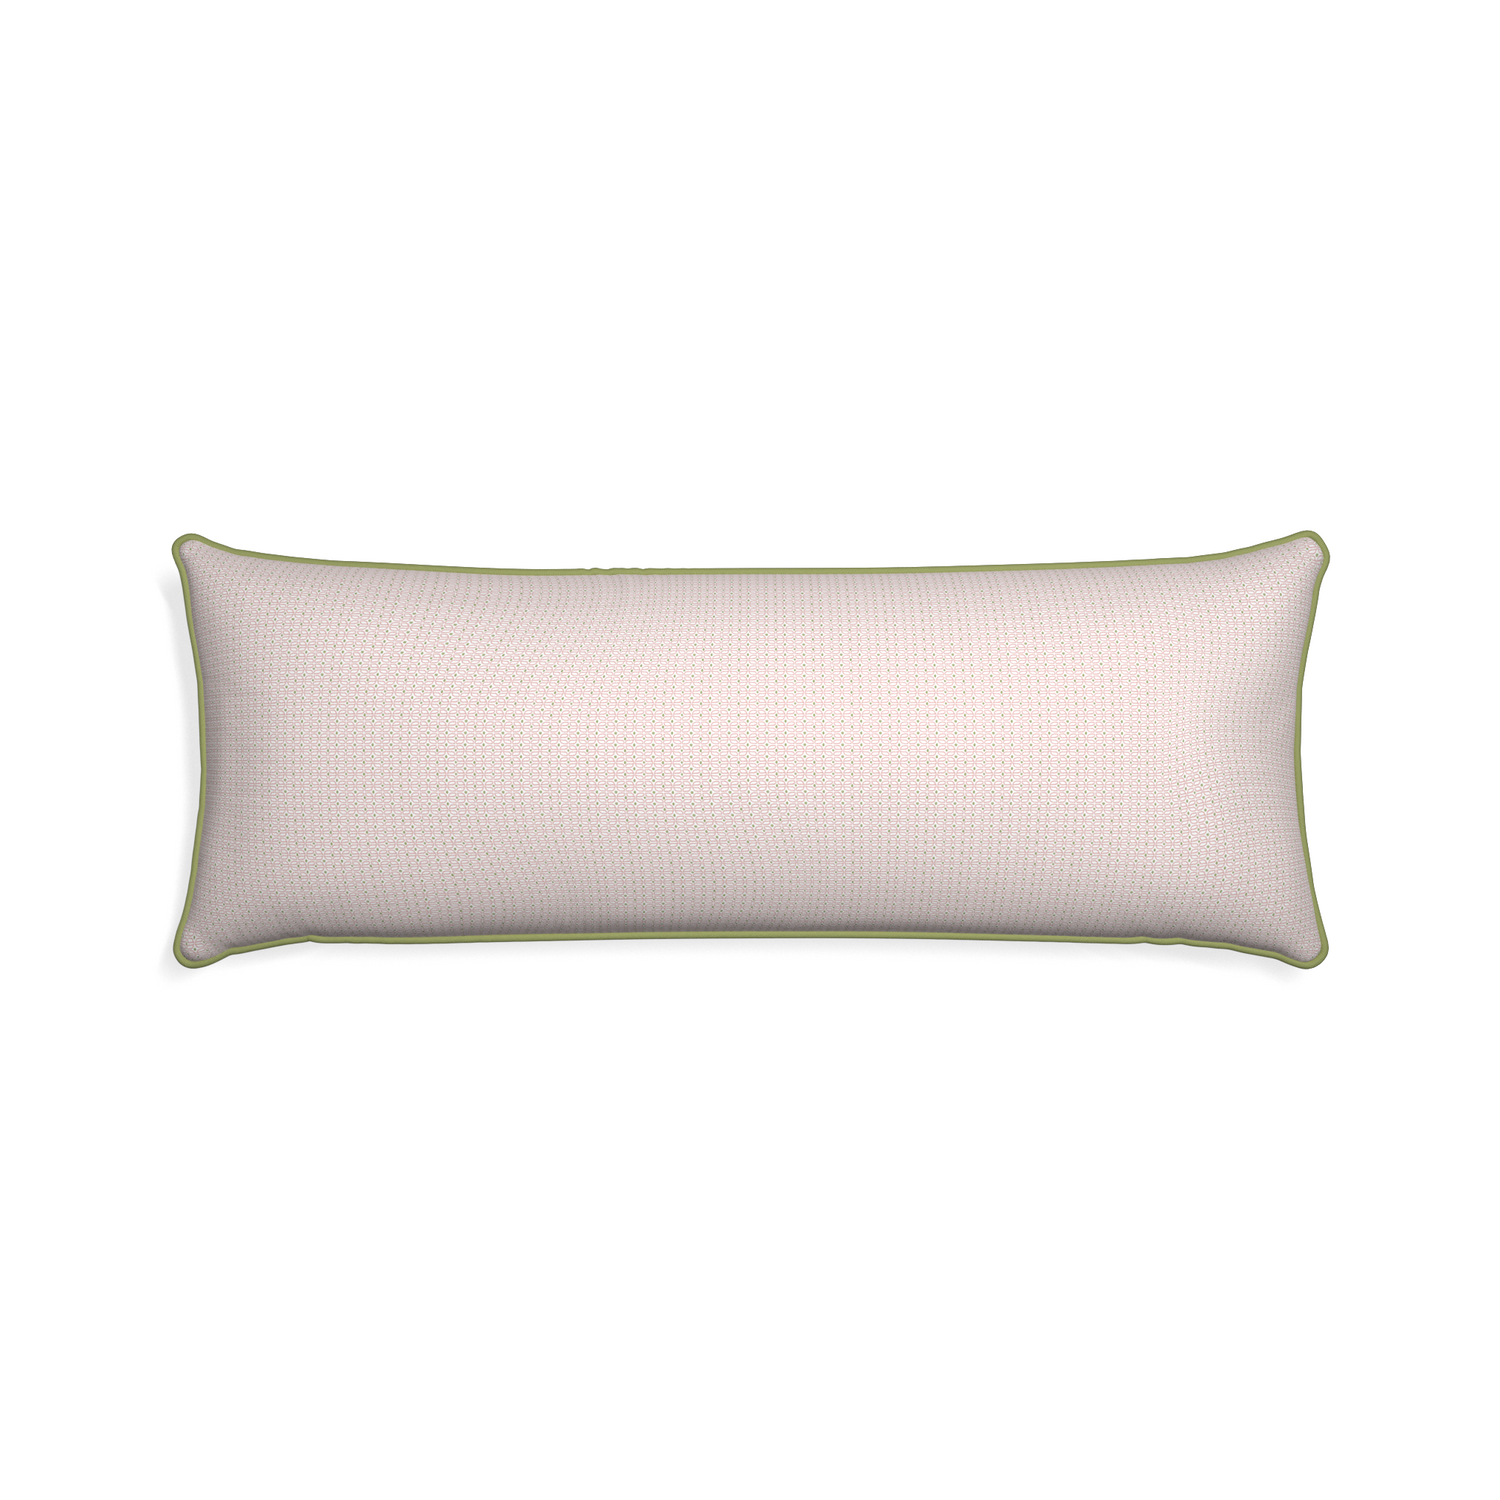 Xl-lumbar loomi pink custom pink geometricpillow with moss piping on white background